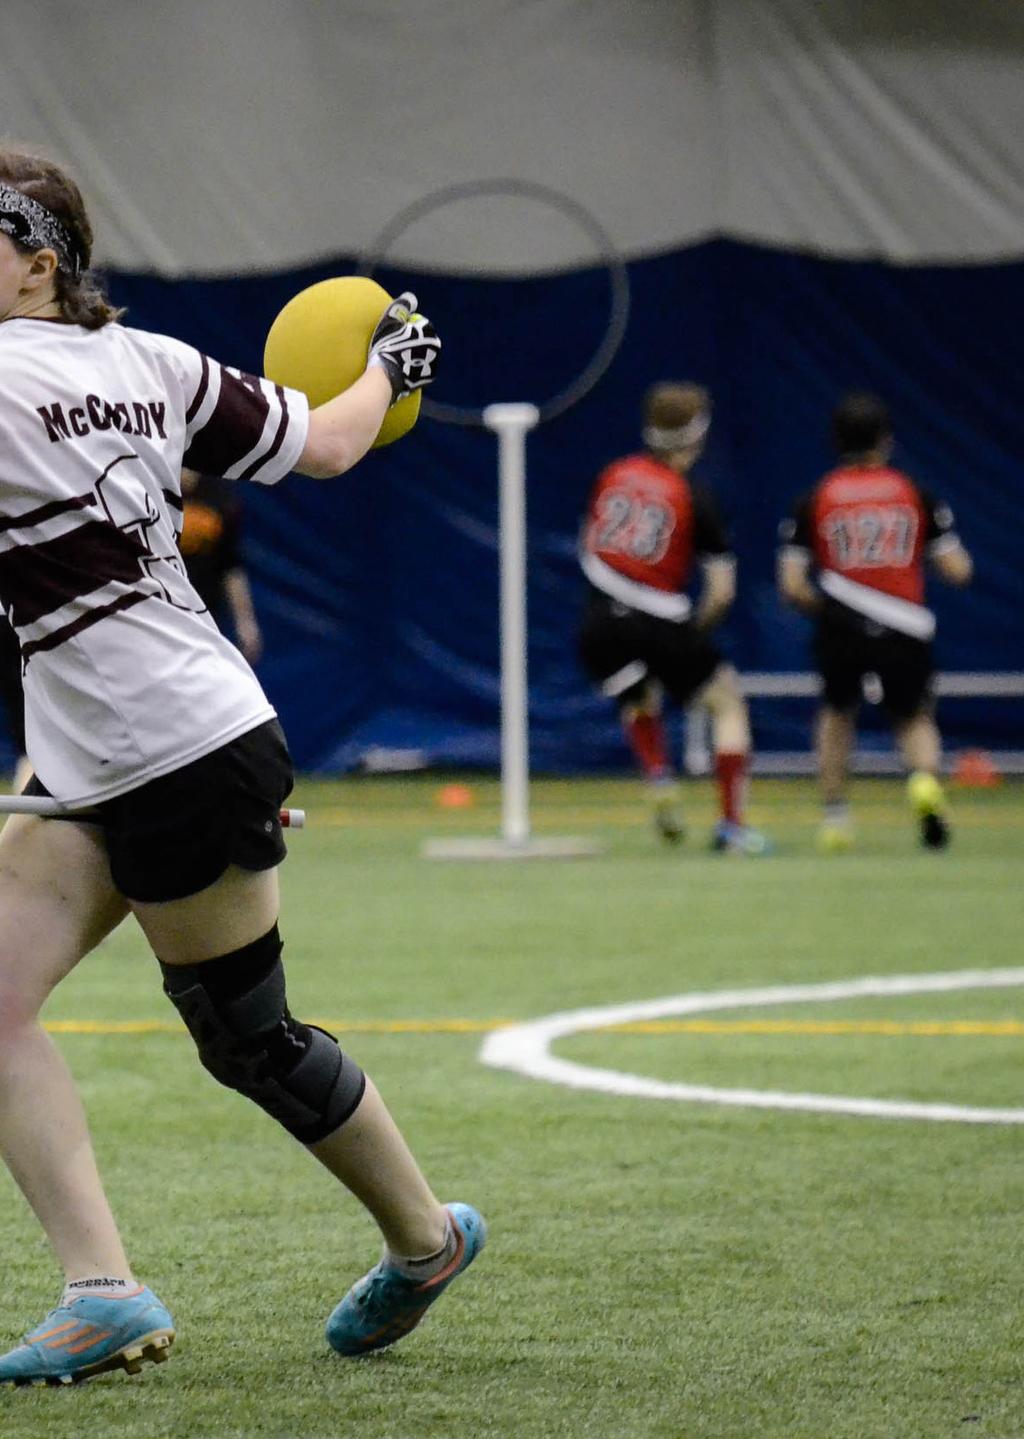 7 MEDIA AND PUBLIC RELATIONS ADDITIONAL BENEFITS Quidditch Canada will provide the following for each event: An event organizing team consisting of Quidditch Canada volunteers Direct oversight by